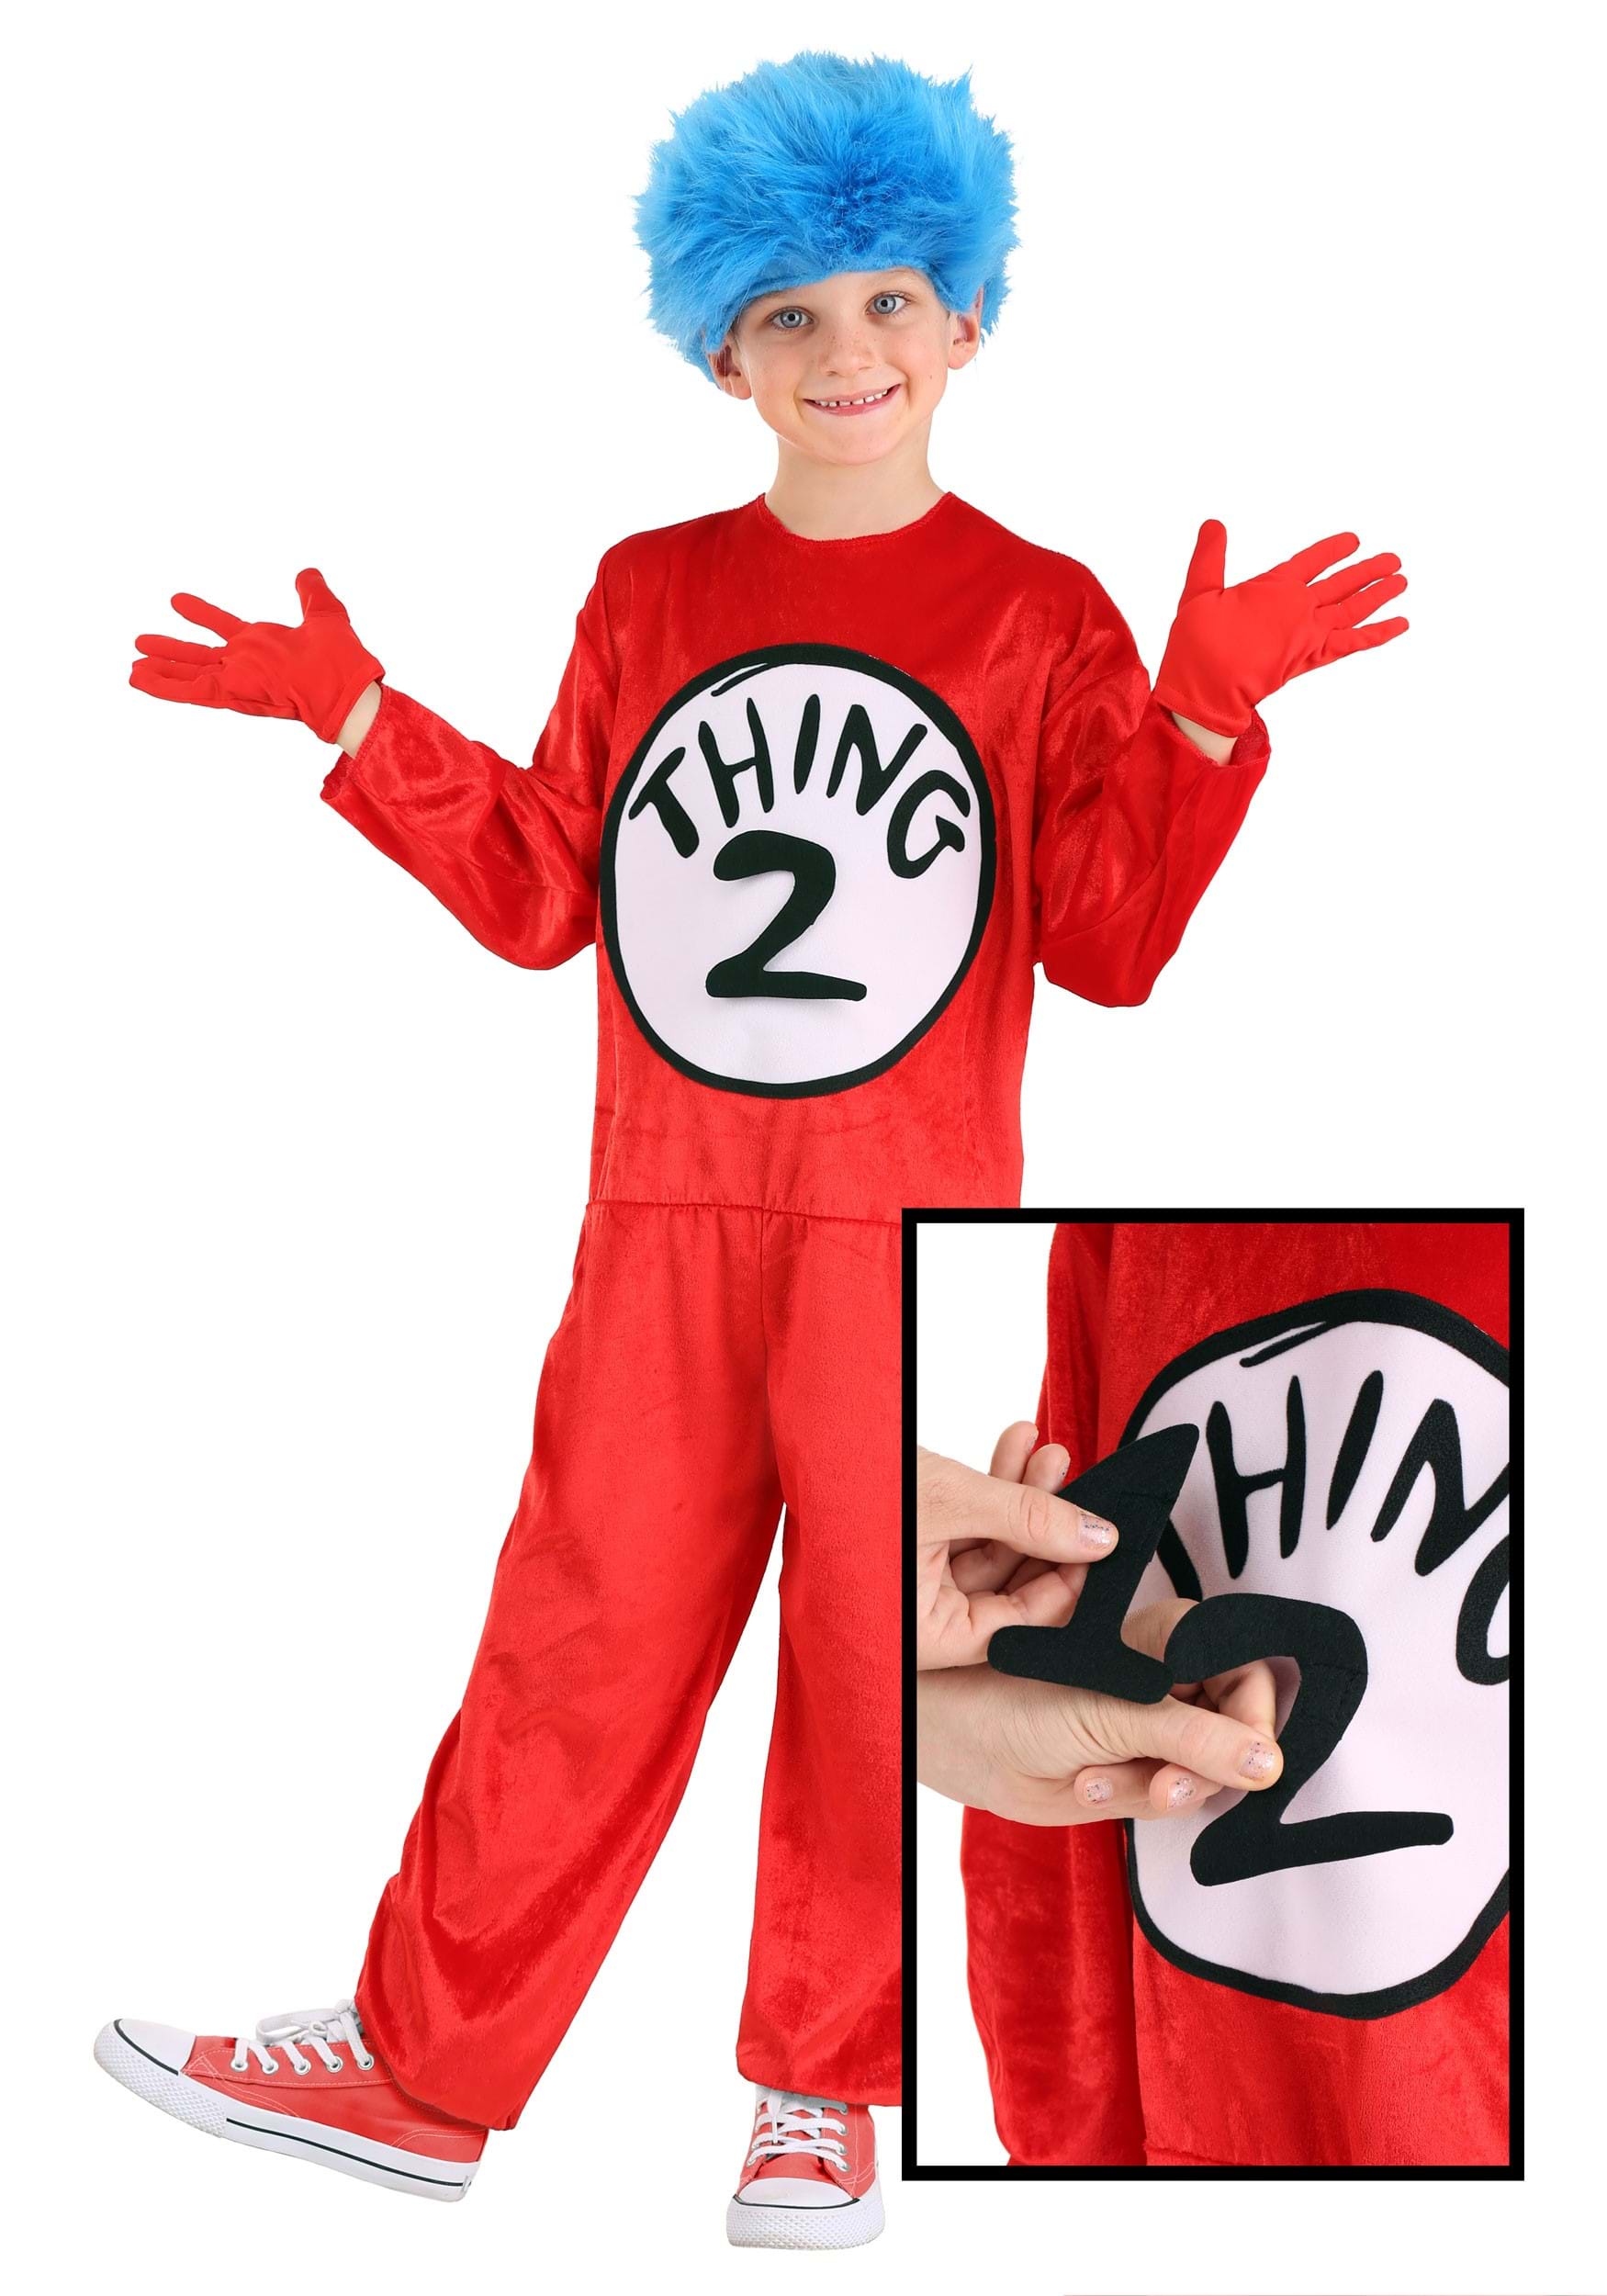 Photos - Fancy Dress FUN Costumes Kids Thing 1 & Thing 2 Costume Blue/Red/White EL40323